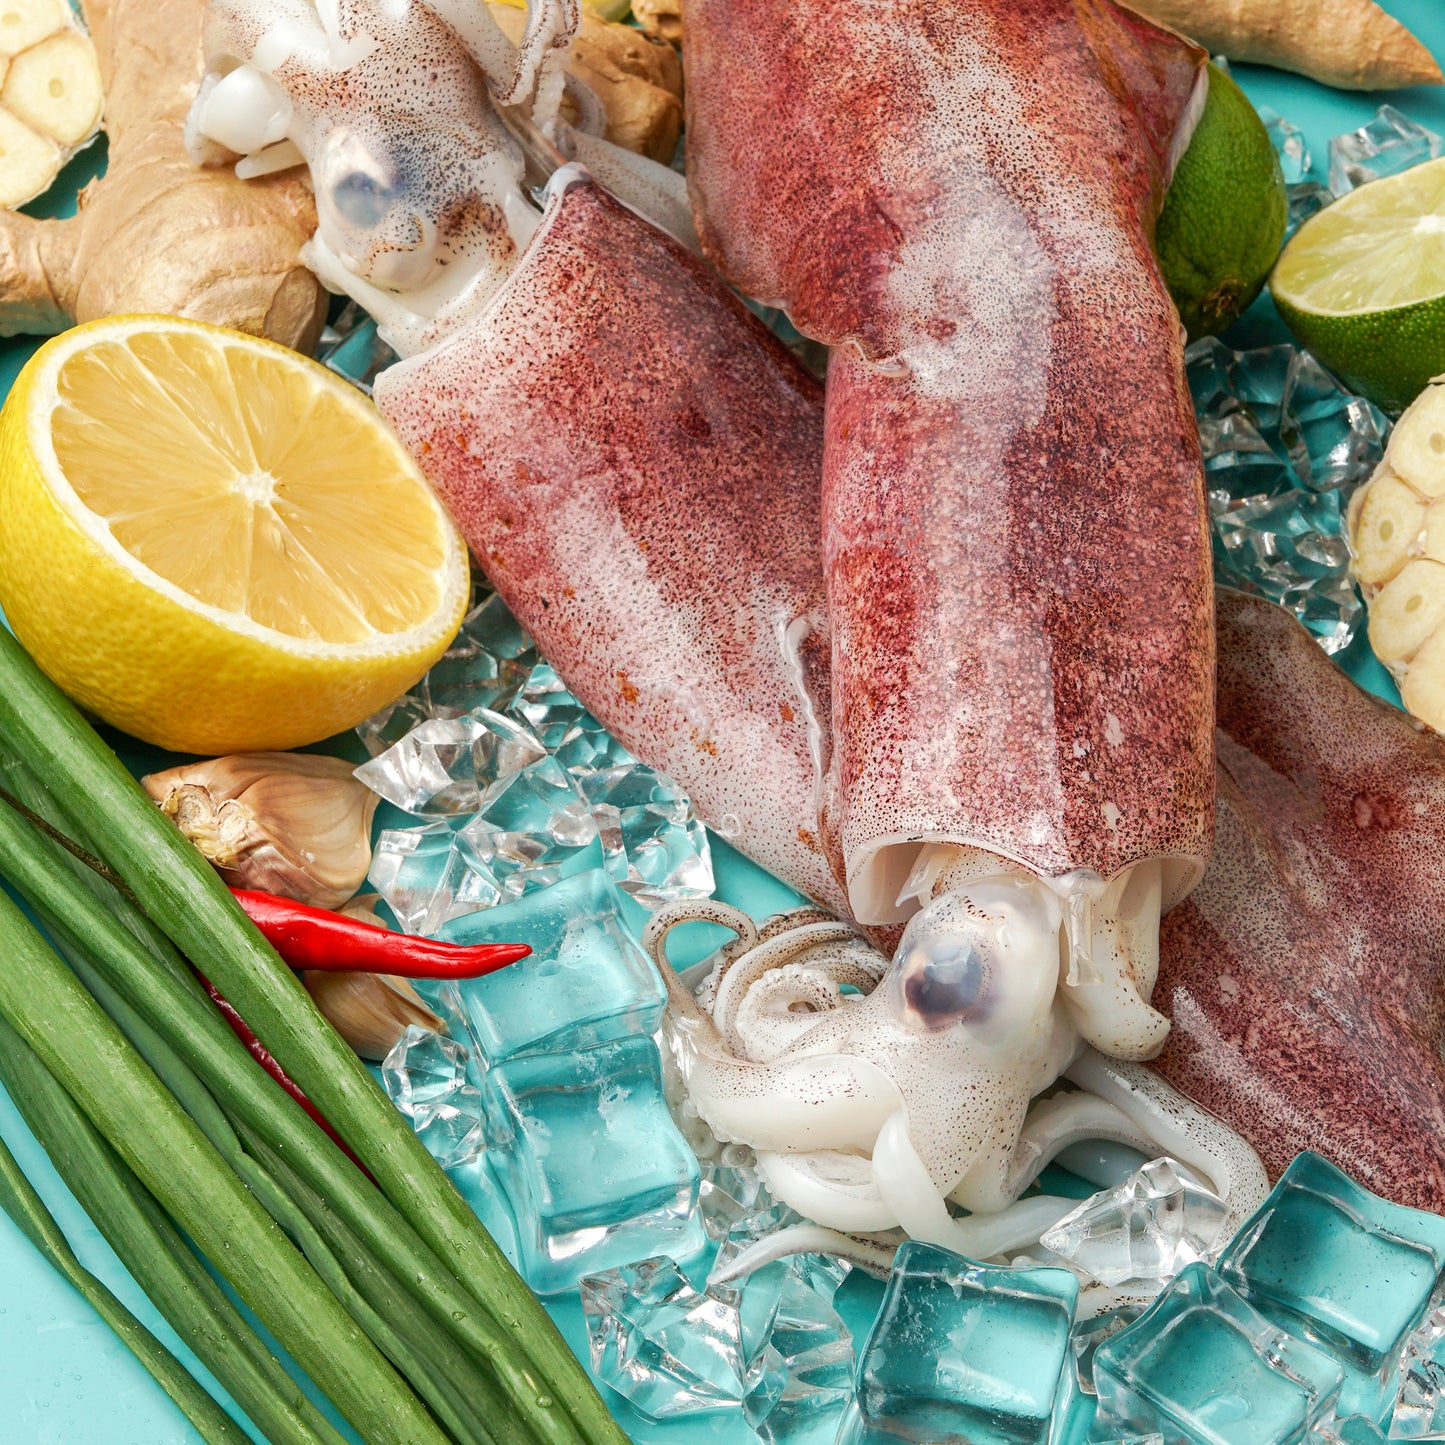 Squid (Sotong)